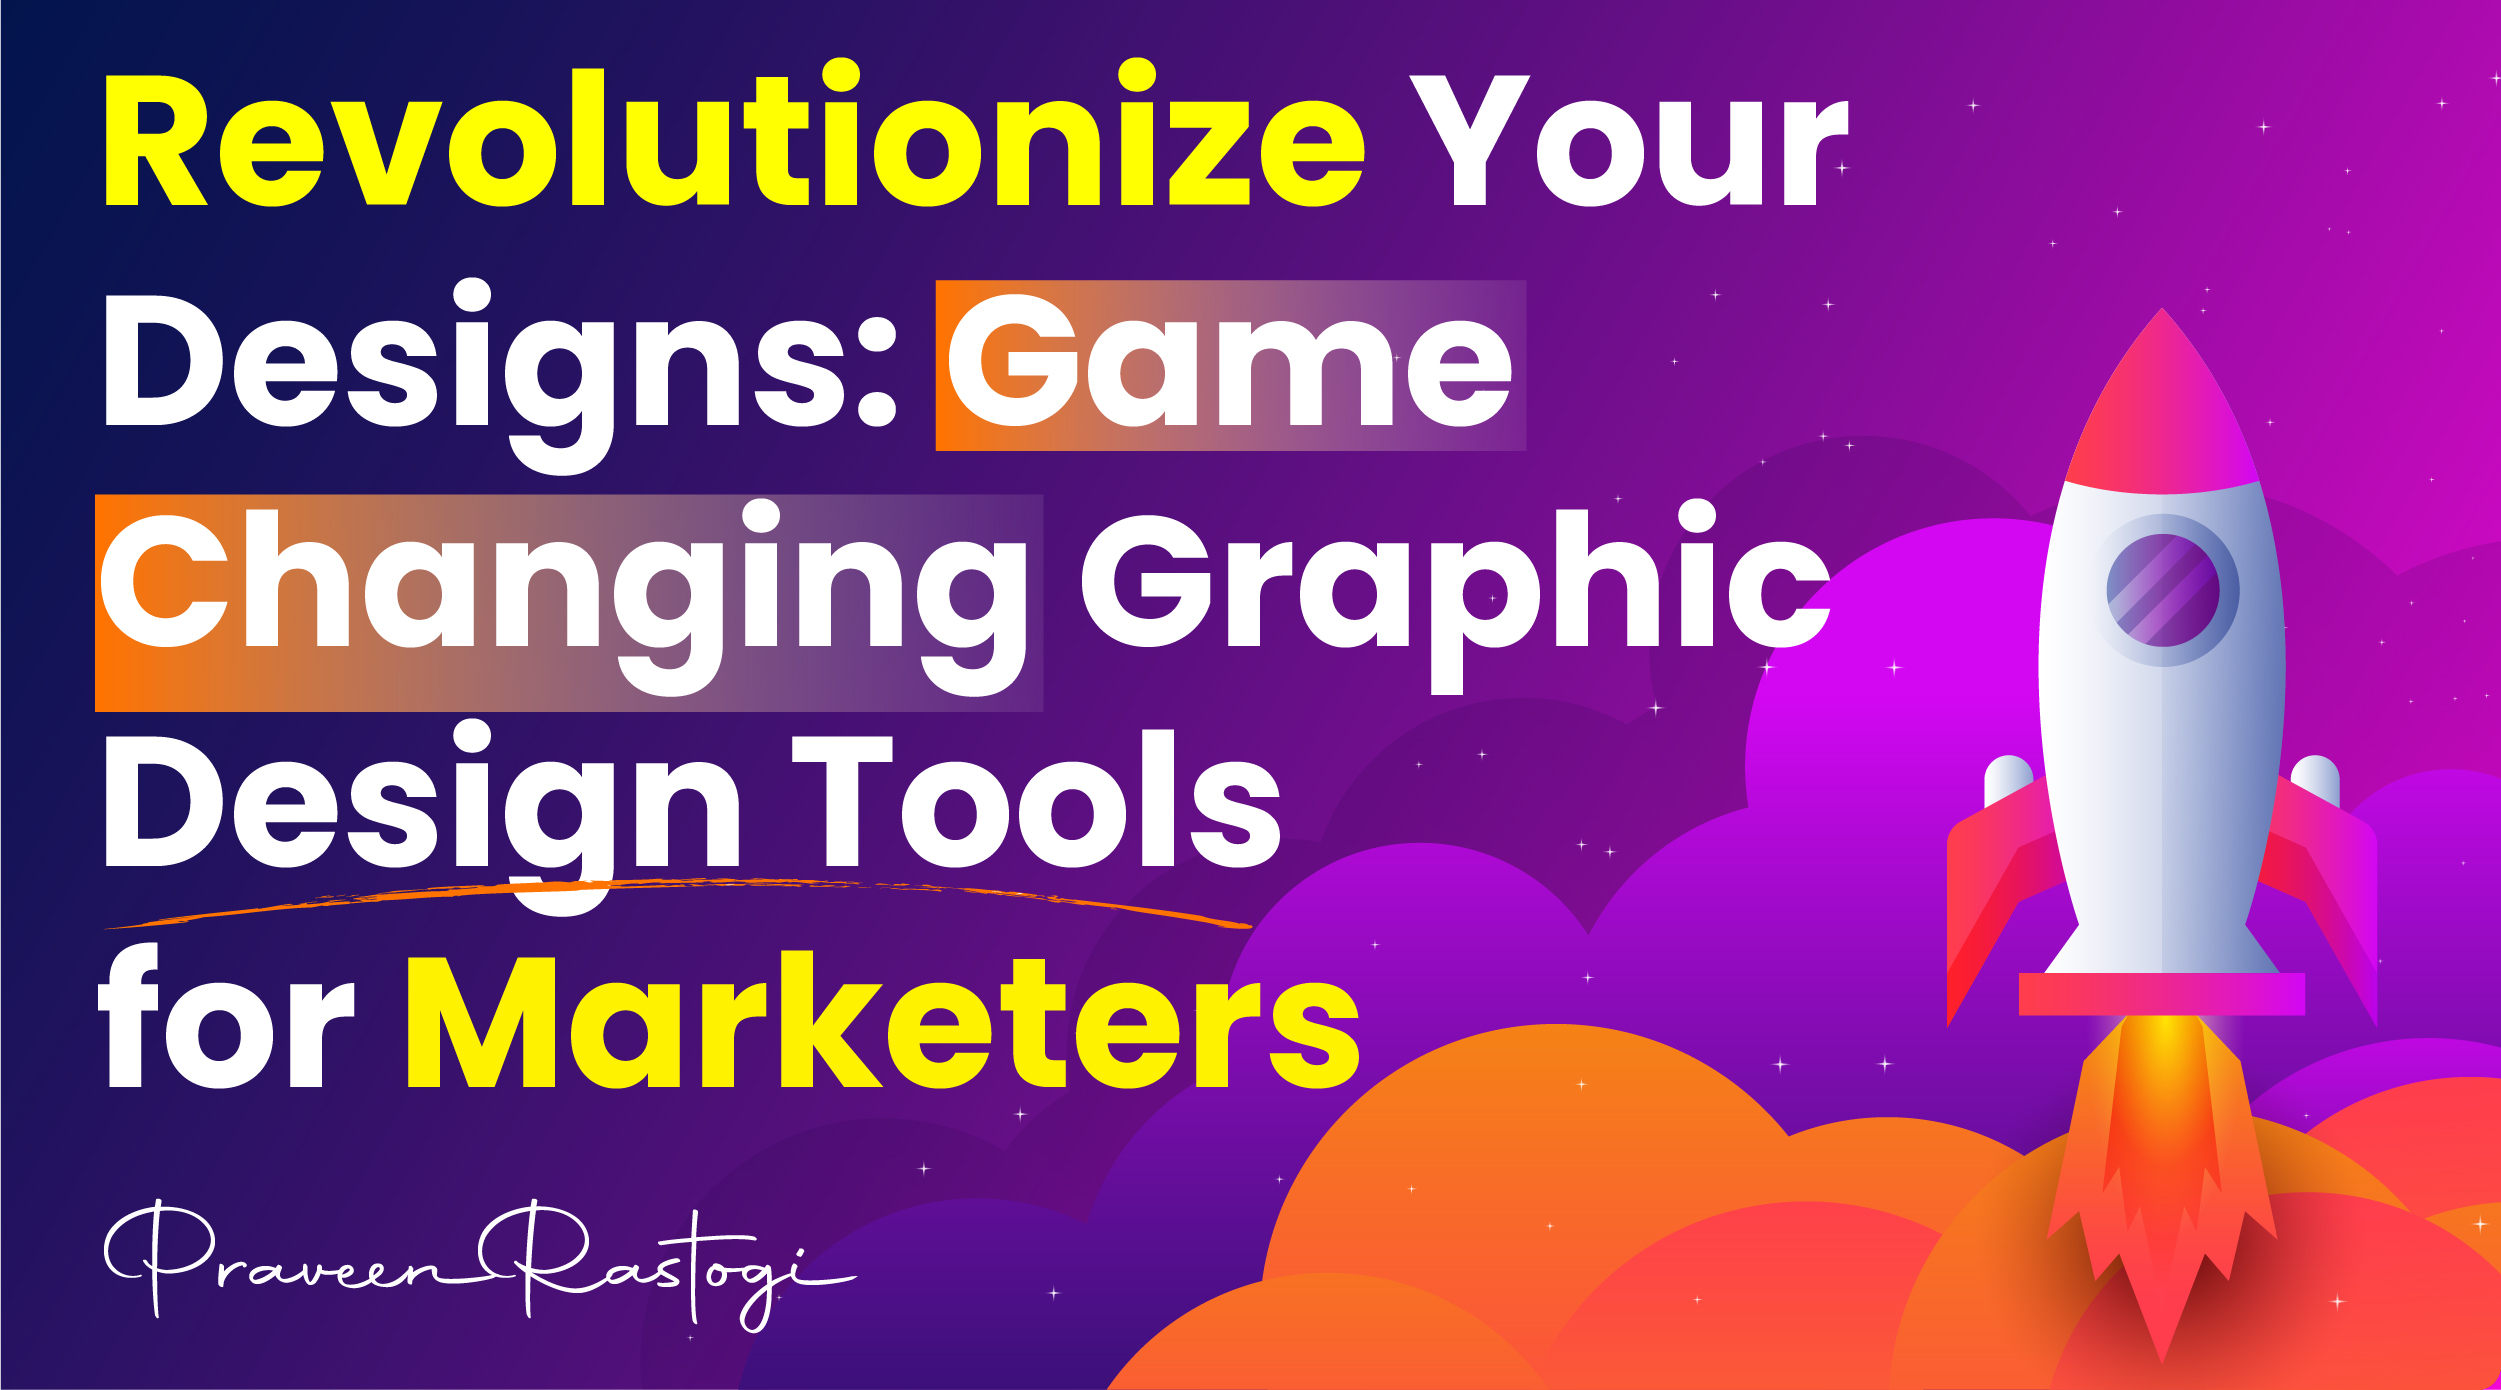 Revolutionize Your Designs Game Changing Graphic Design Tools for Marketers Linkedi